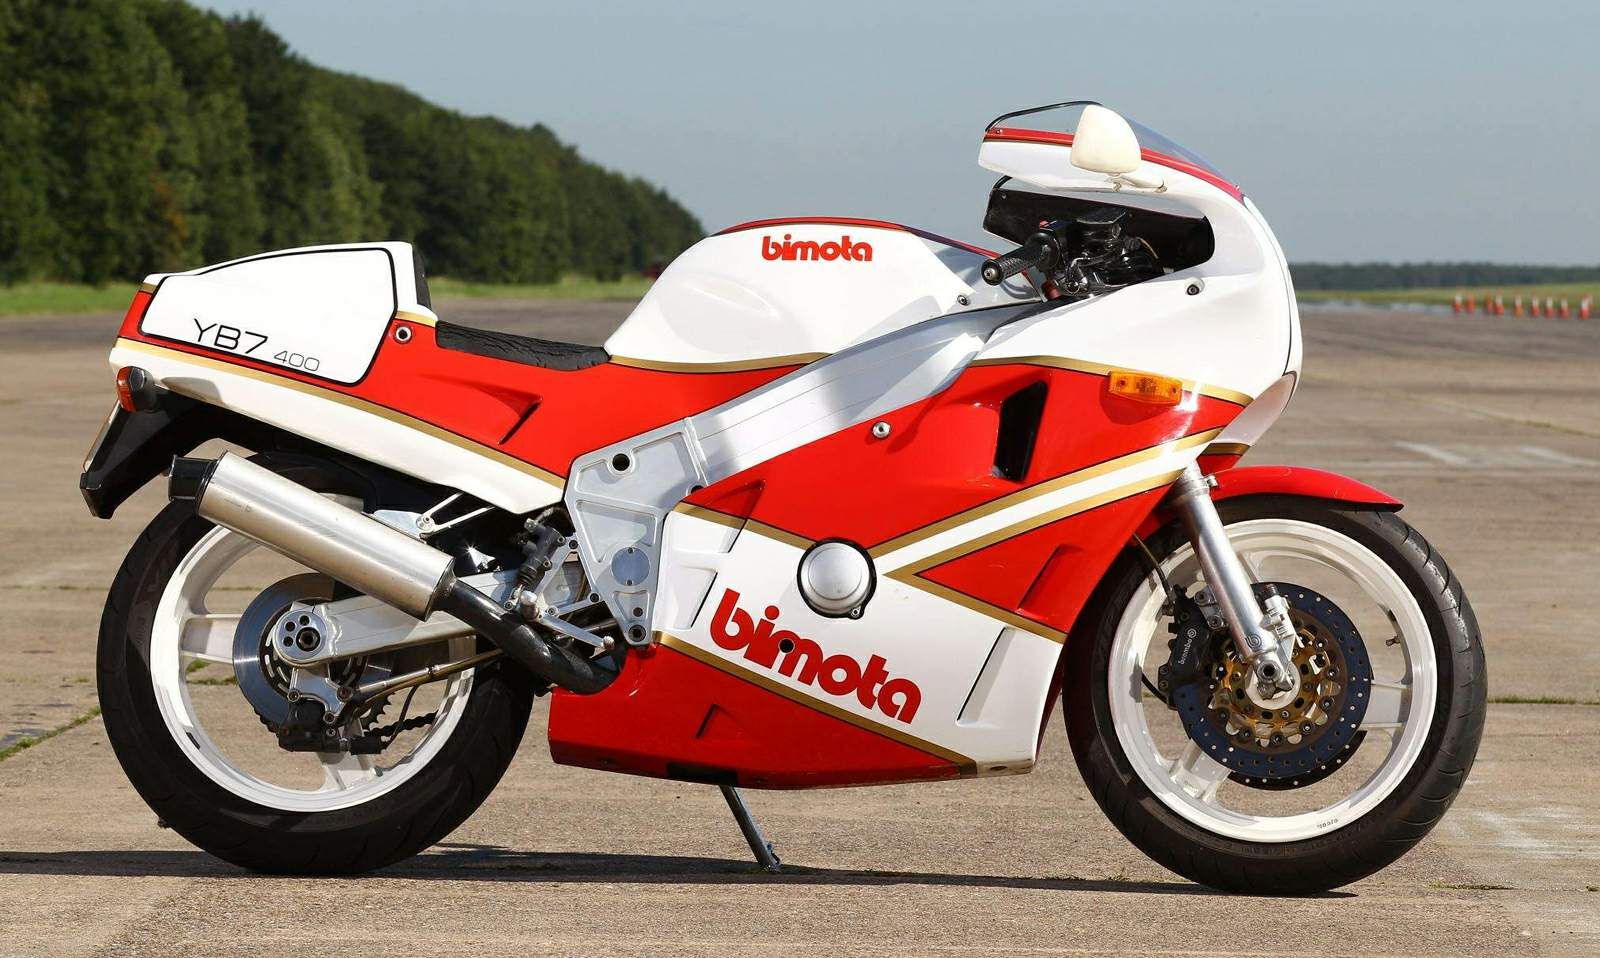 Bimota YB7 in red and white